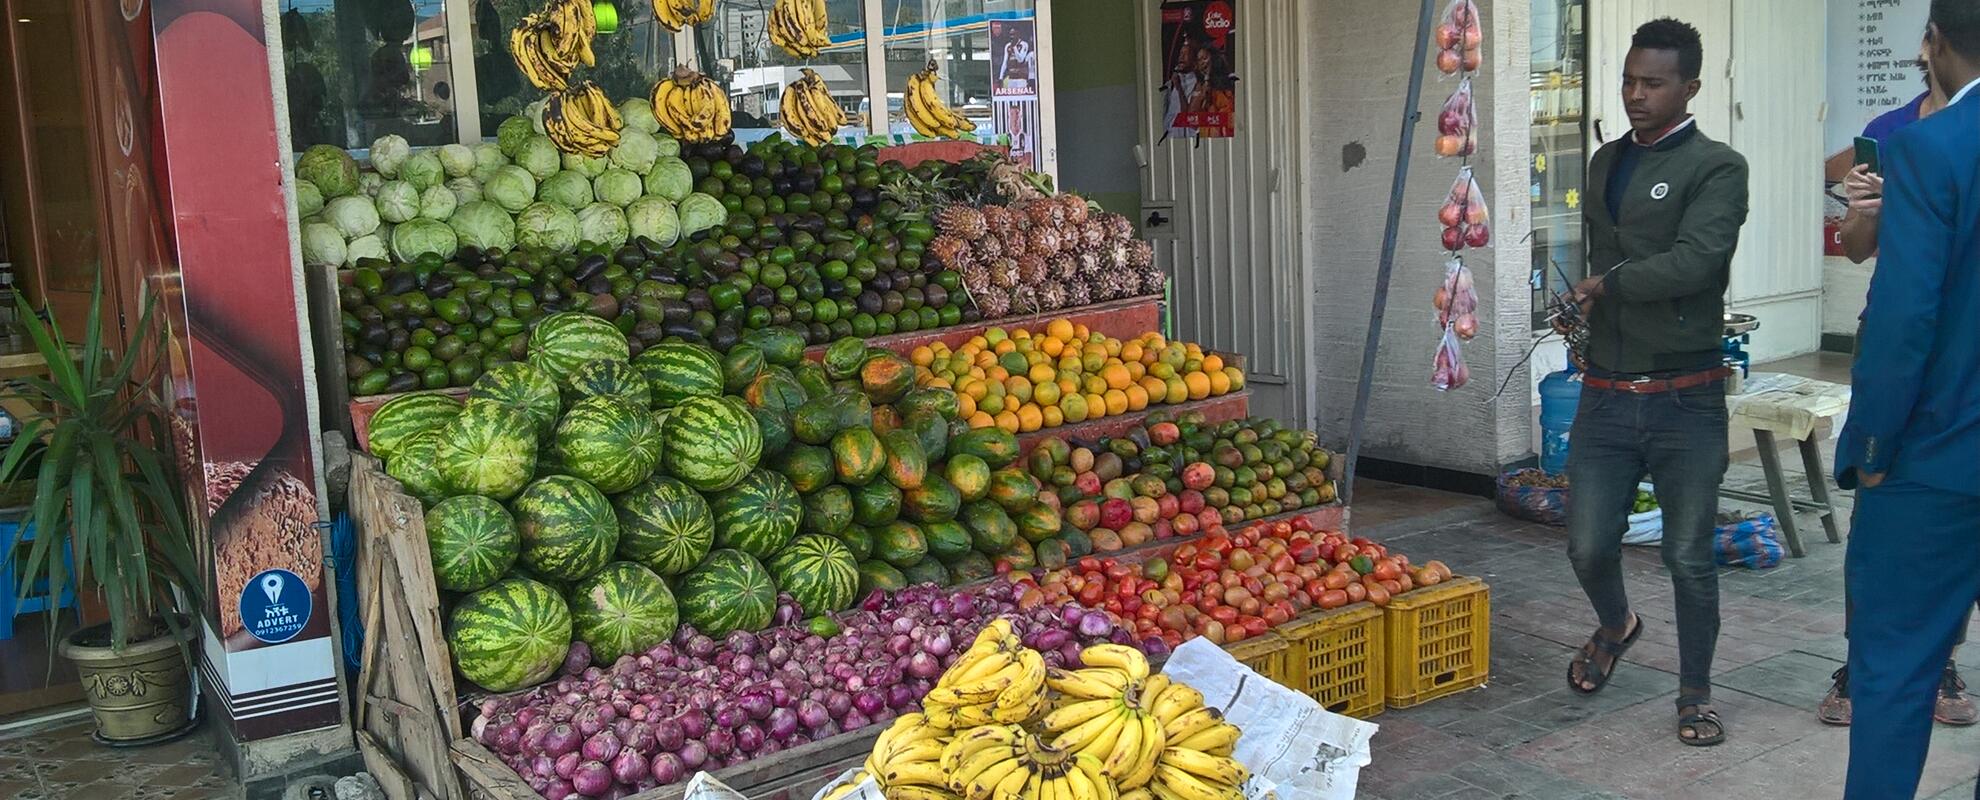 Fruit and vegetable shop in Addis Ababa, Ethiopia